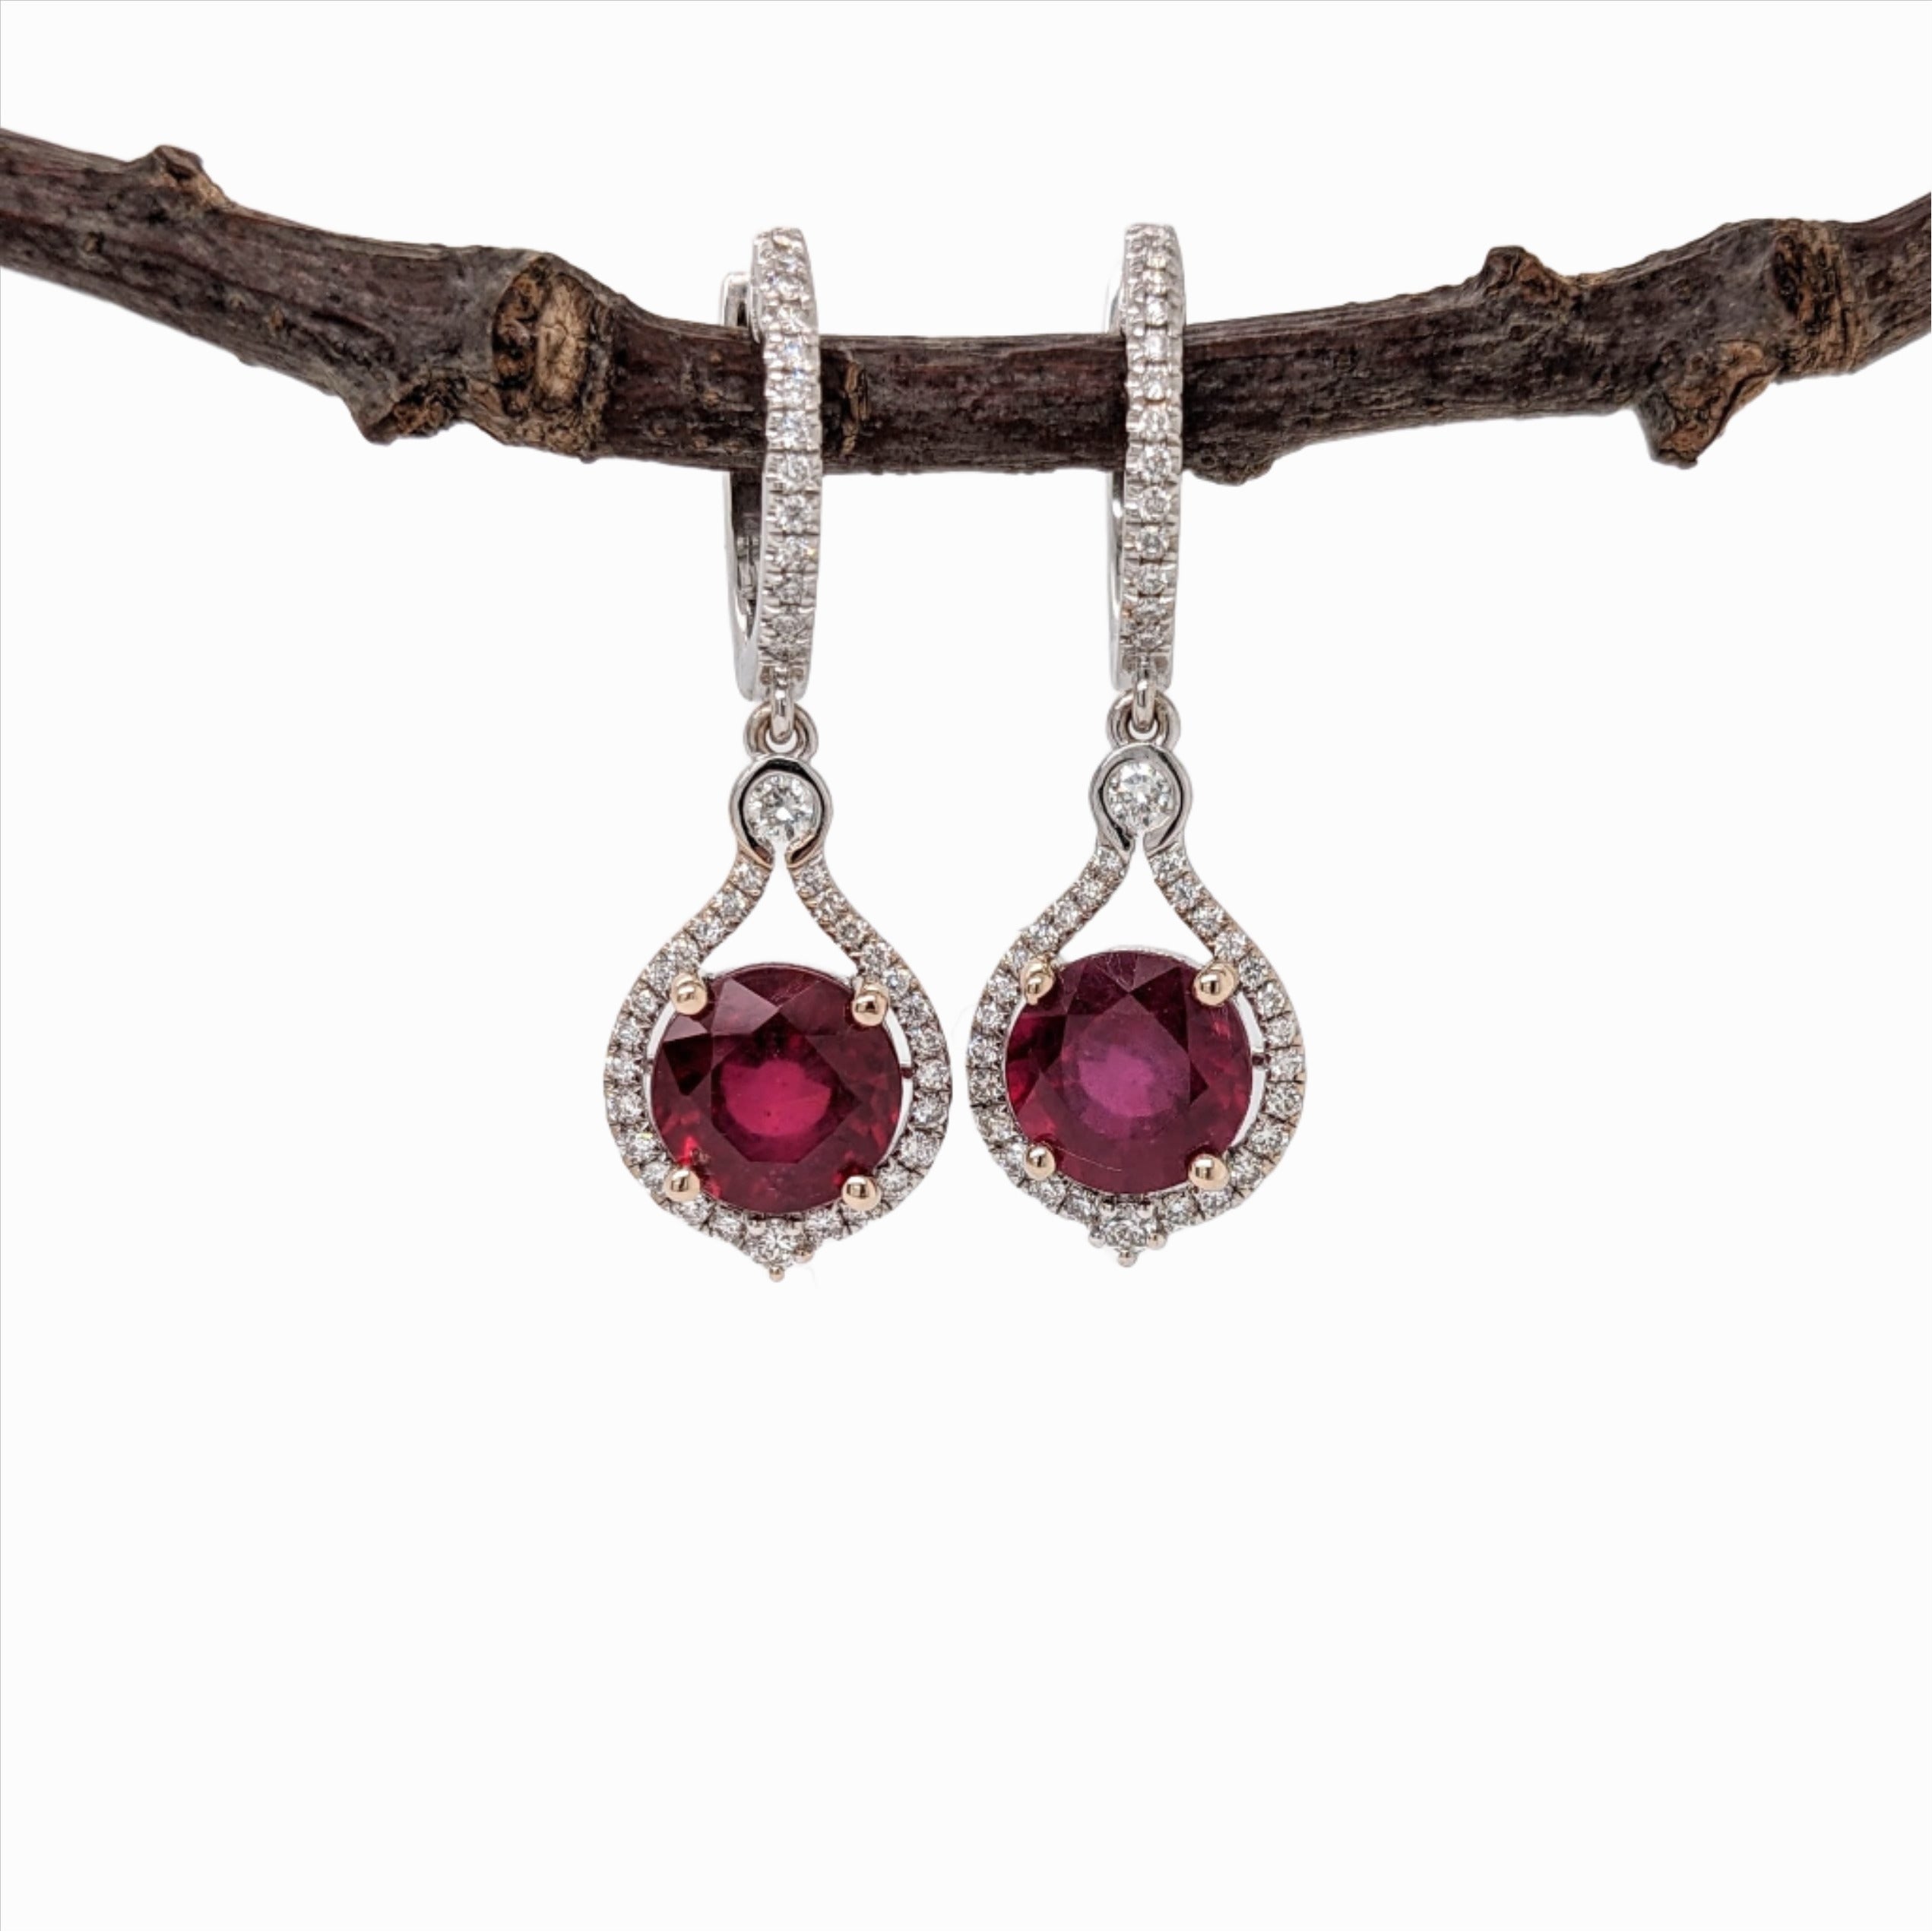 Beautiful Dangle Red Ruby Earrings in 14K Solid Gold w Natural Diamond Halo Accents | Round Shape 8mm | Secure Latch Back | July Birthstone